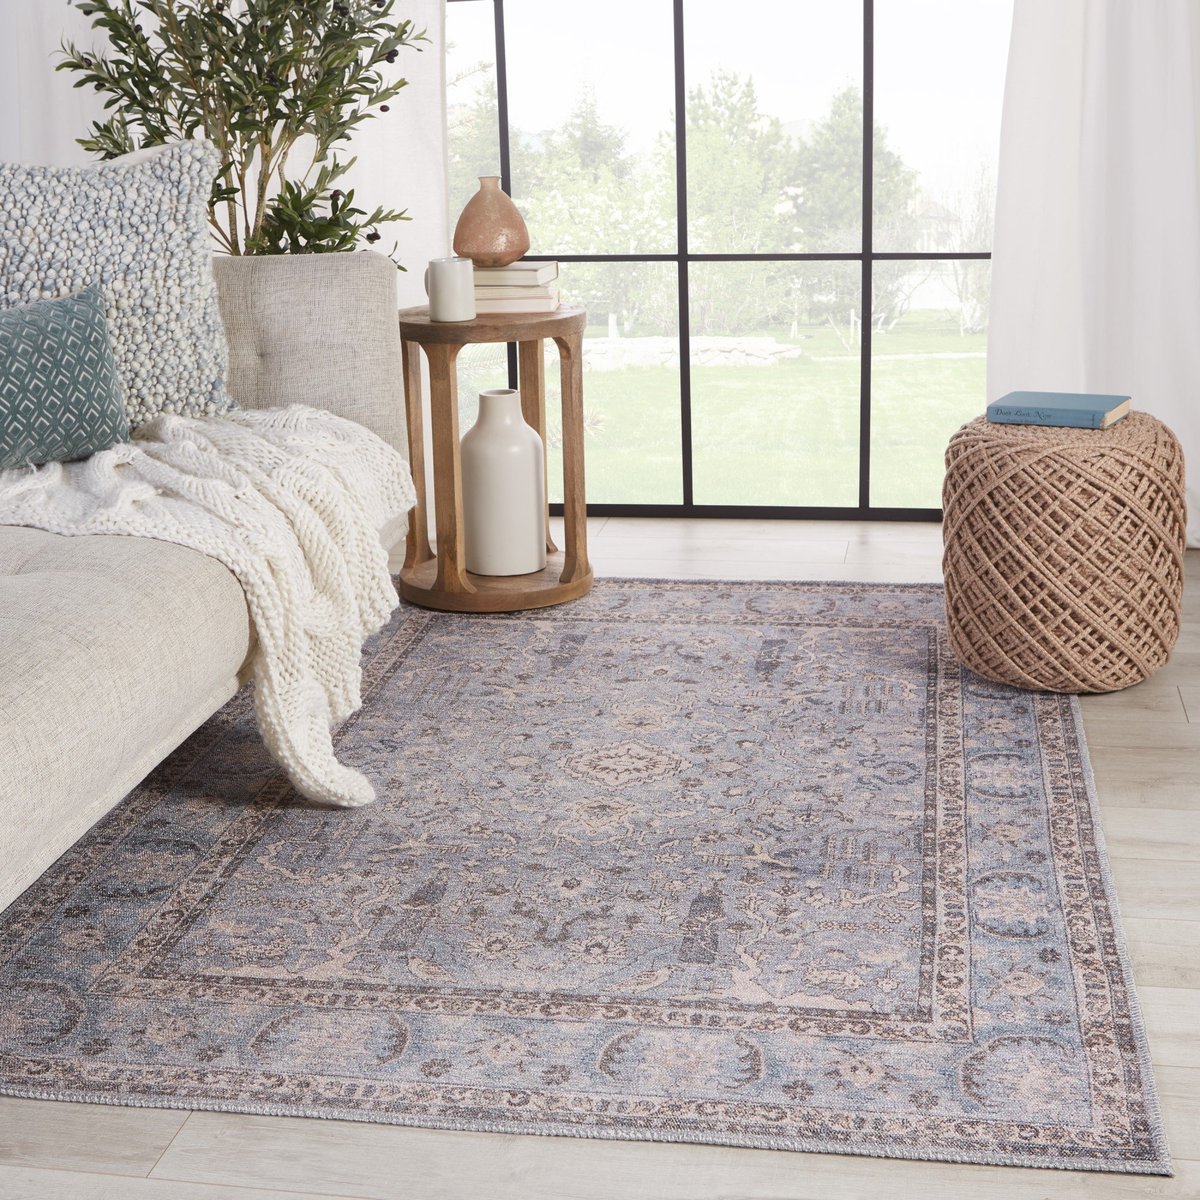 Kindred - Best Dining Room Rugs